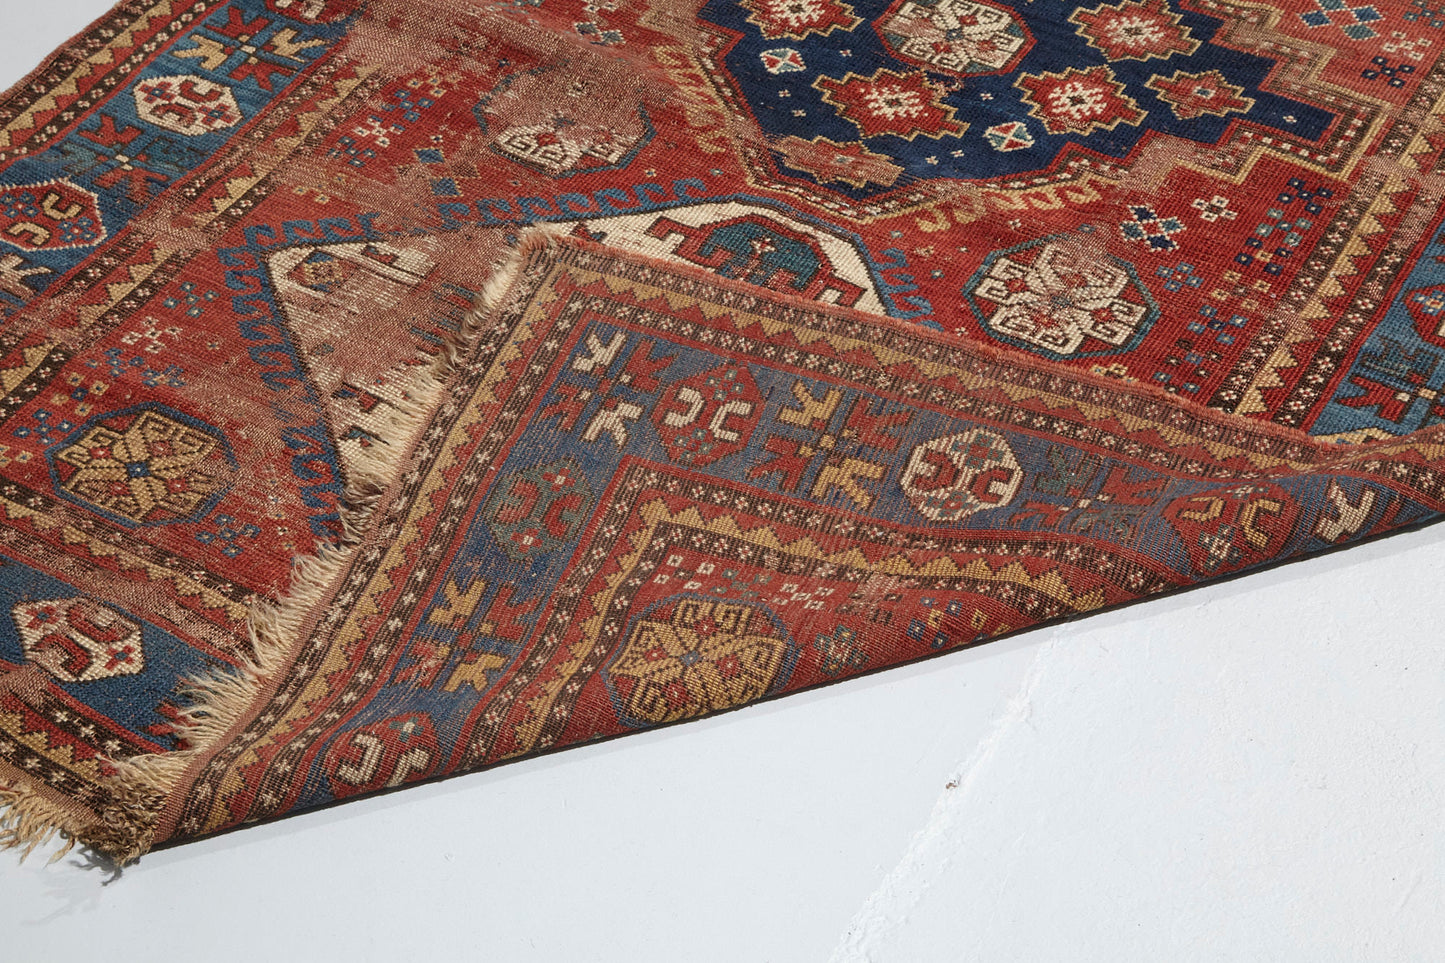 Front and back of beautifully worn antique Kazak Persian Rug with red, blue and cream colors - Available from King Kennedy Rugs Los Angeles